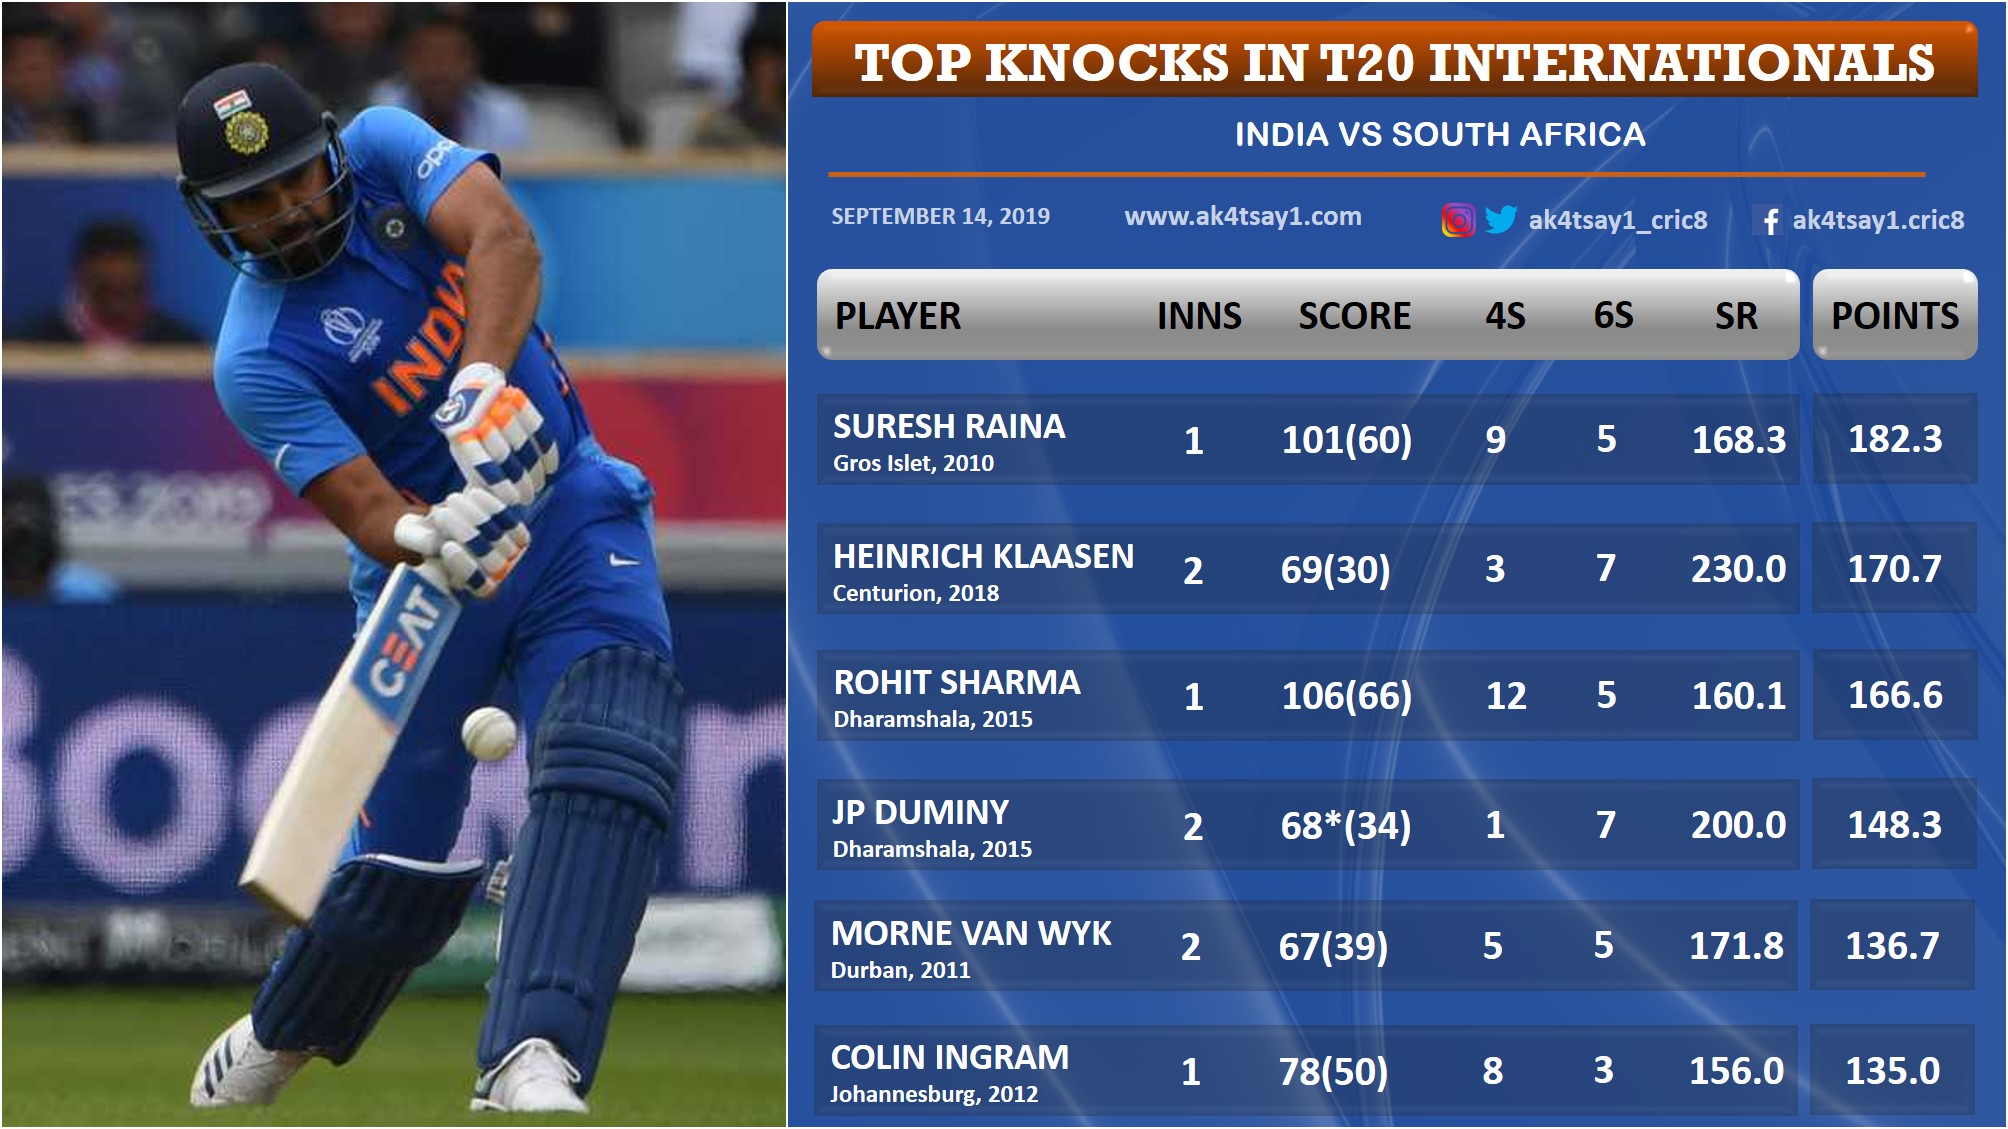 India vs South Africa Stats Wizard: Top 5 knocks in T20 Internationals